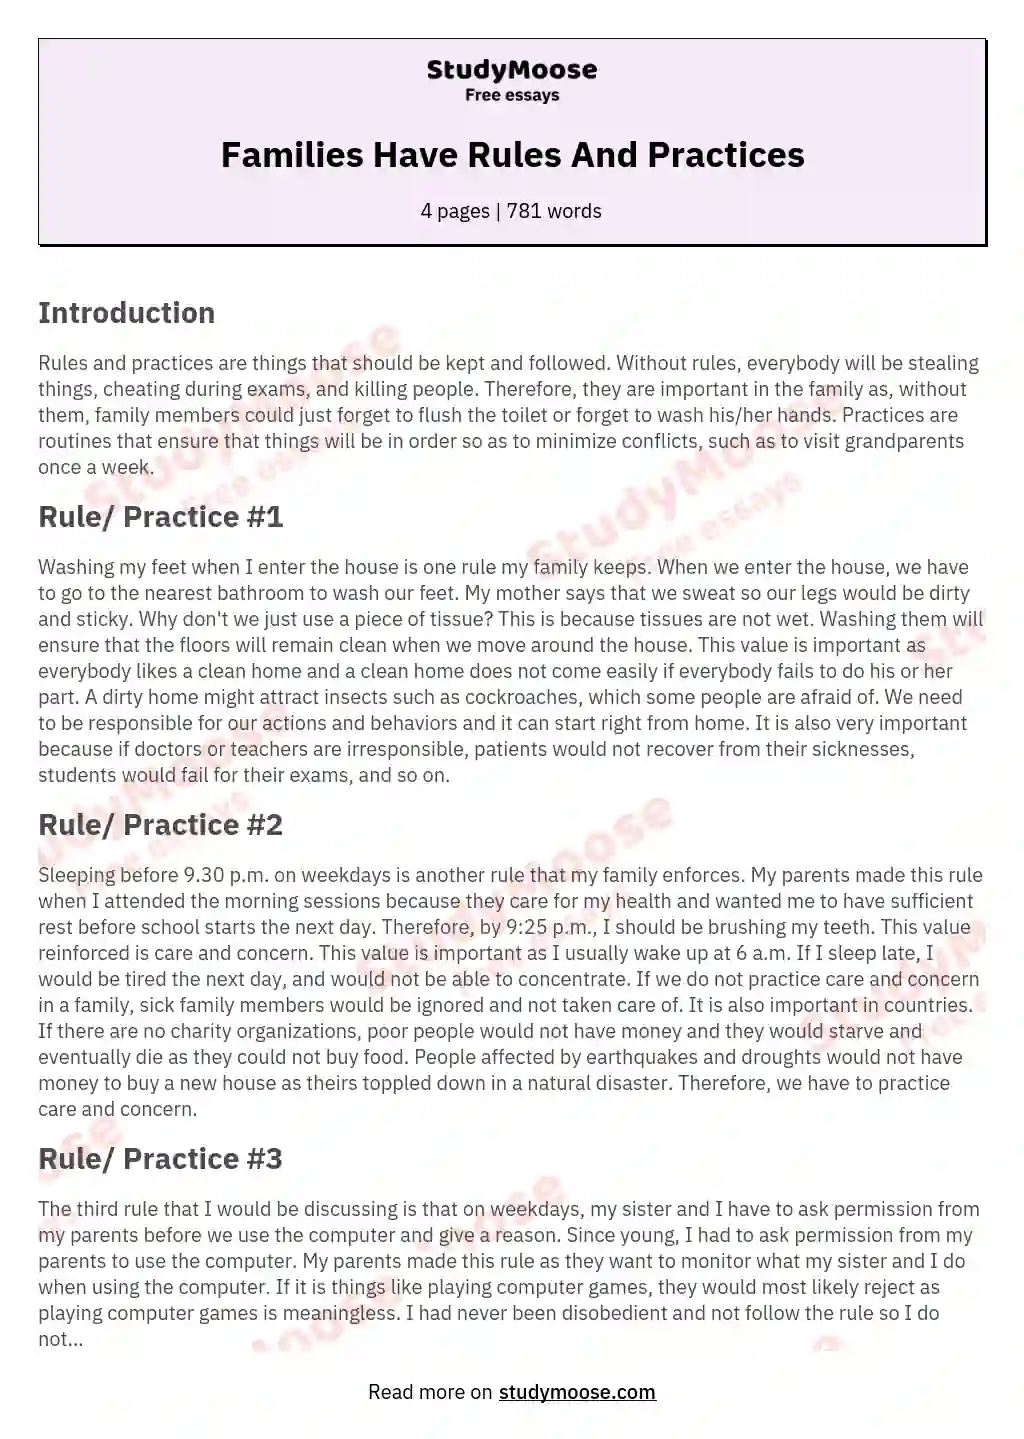 Families Have Rules And Practices essay